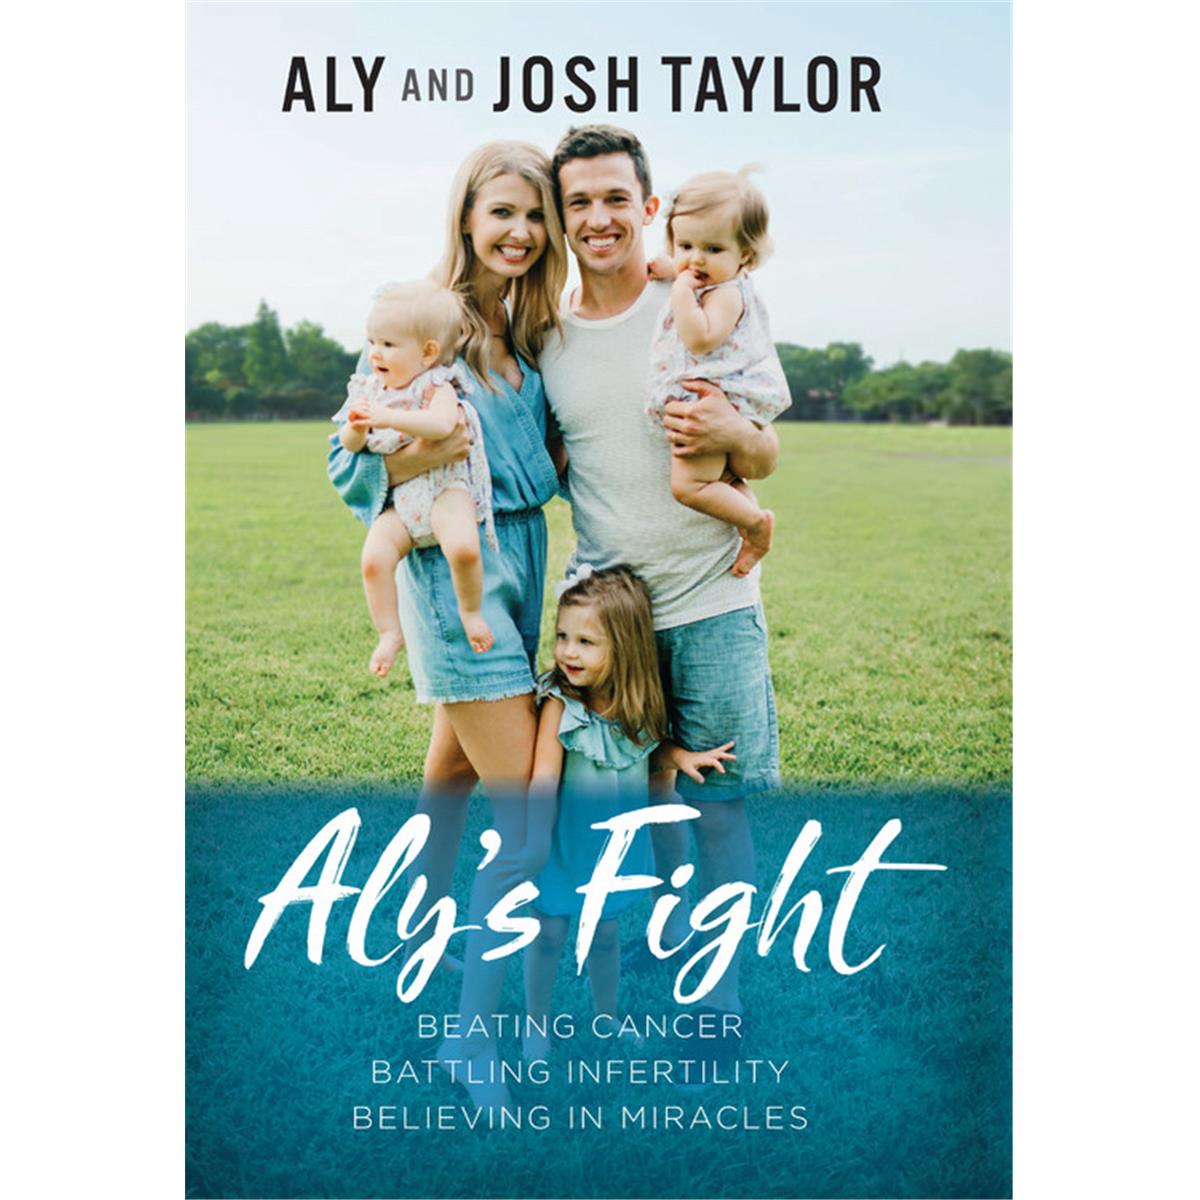 134470 Alys Fight By Taylor Aly